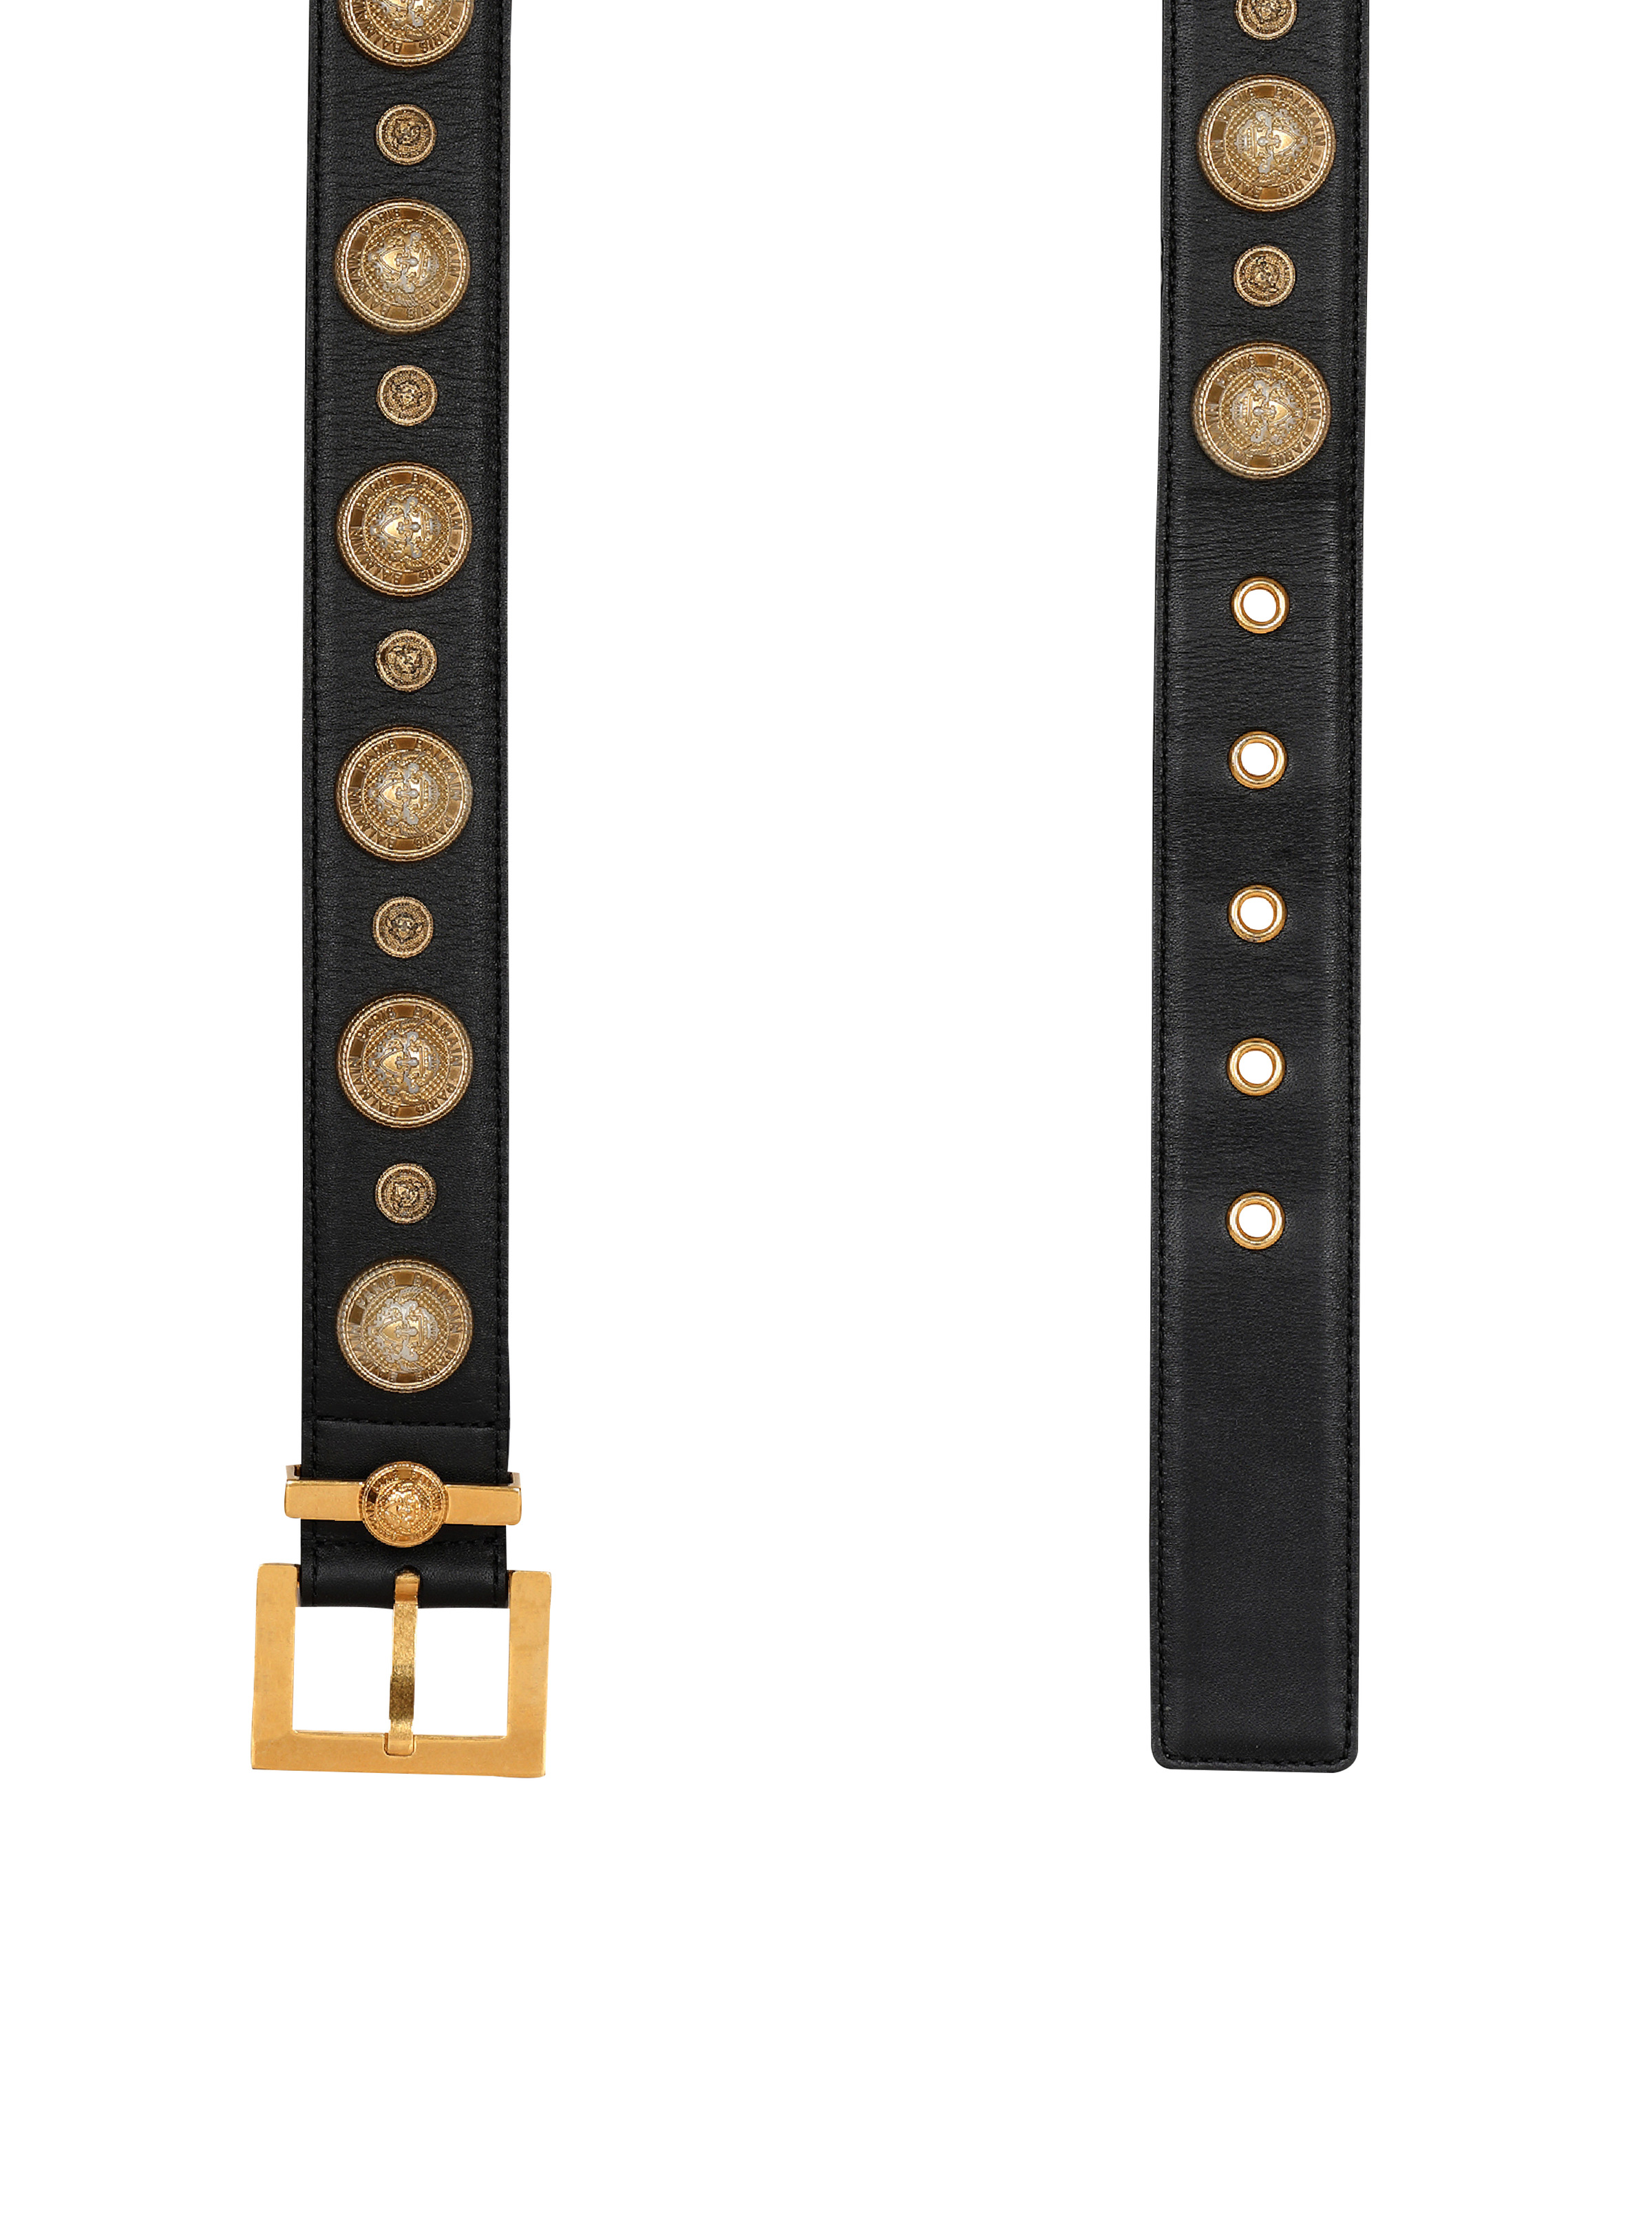 Leather 'Coin' belt - 4